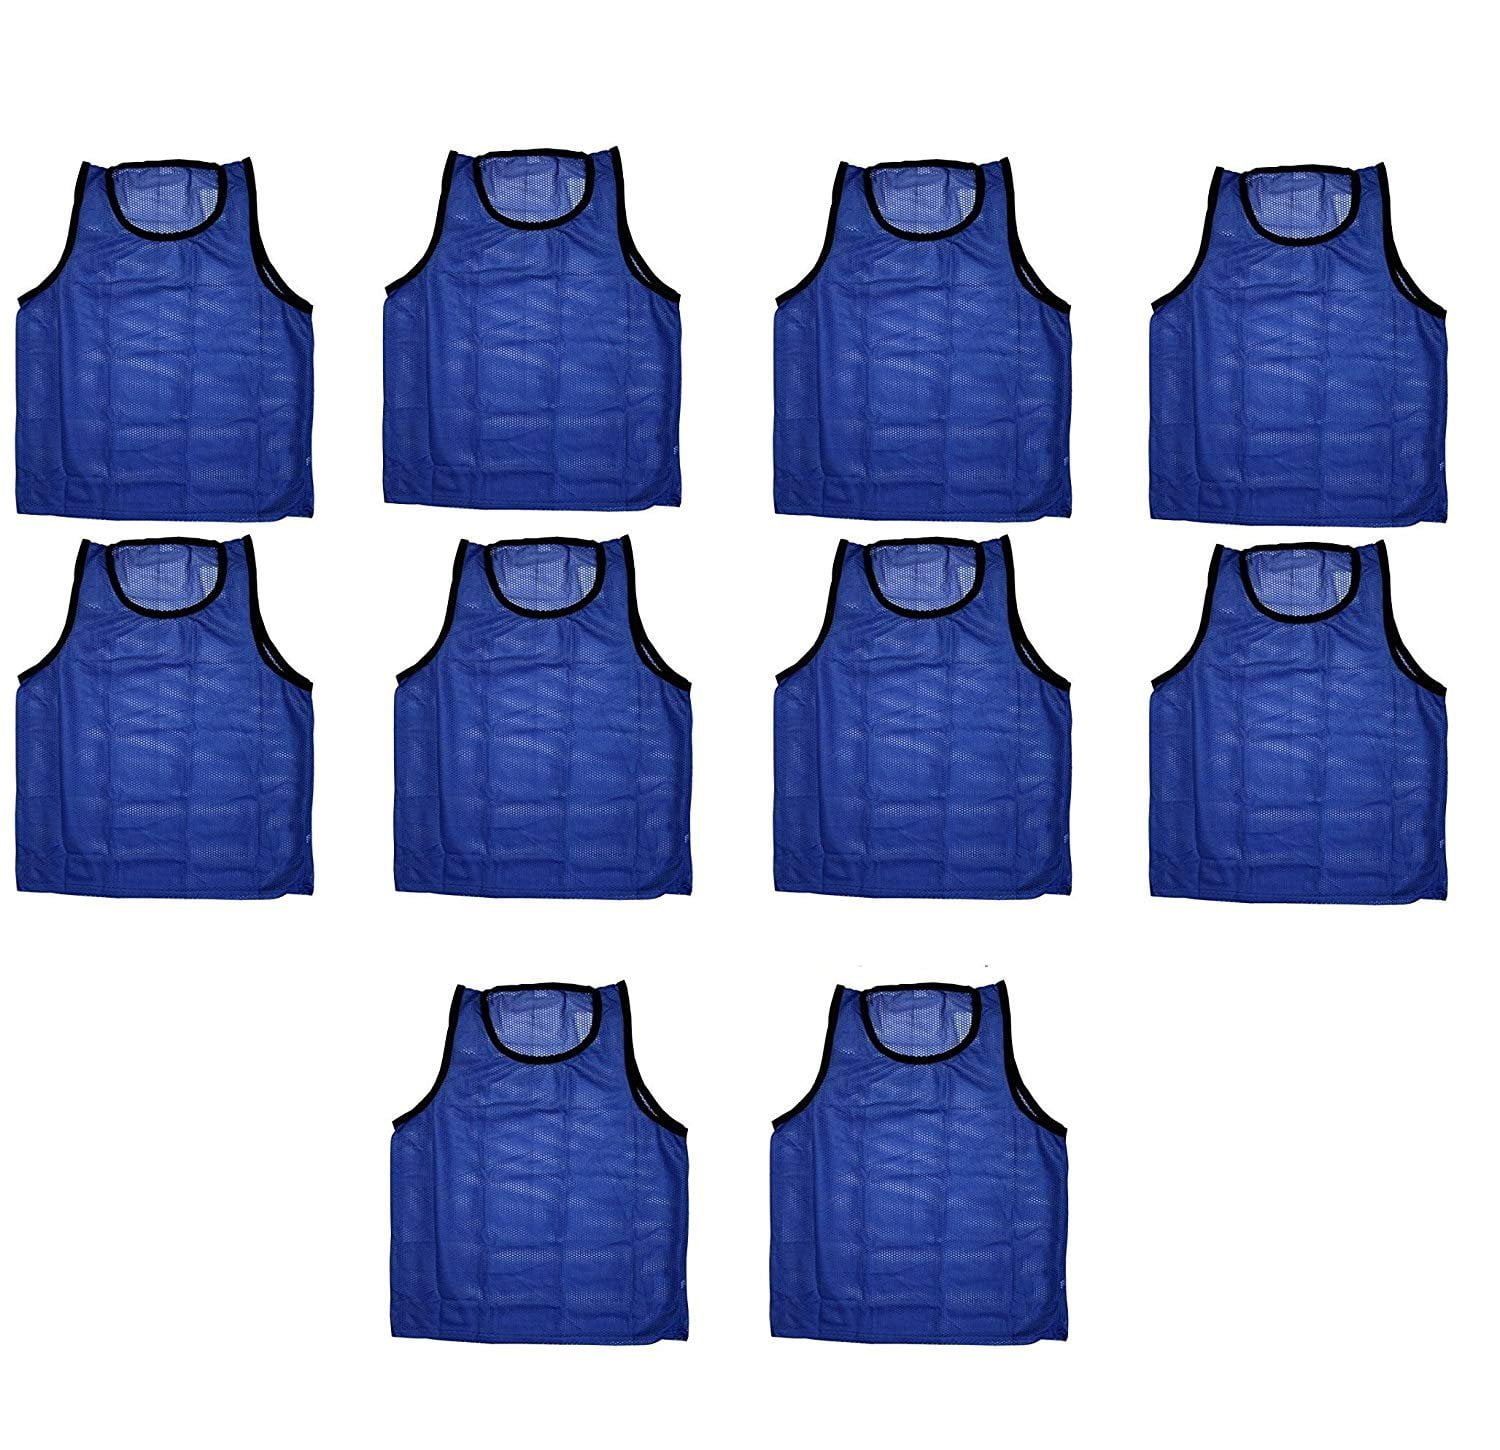 12 SCRIMMAGE VESTS PINNIES SOCCER ADULT BLUE ~BRAND NEW 